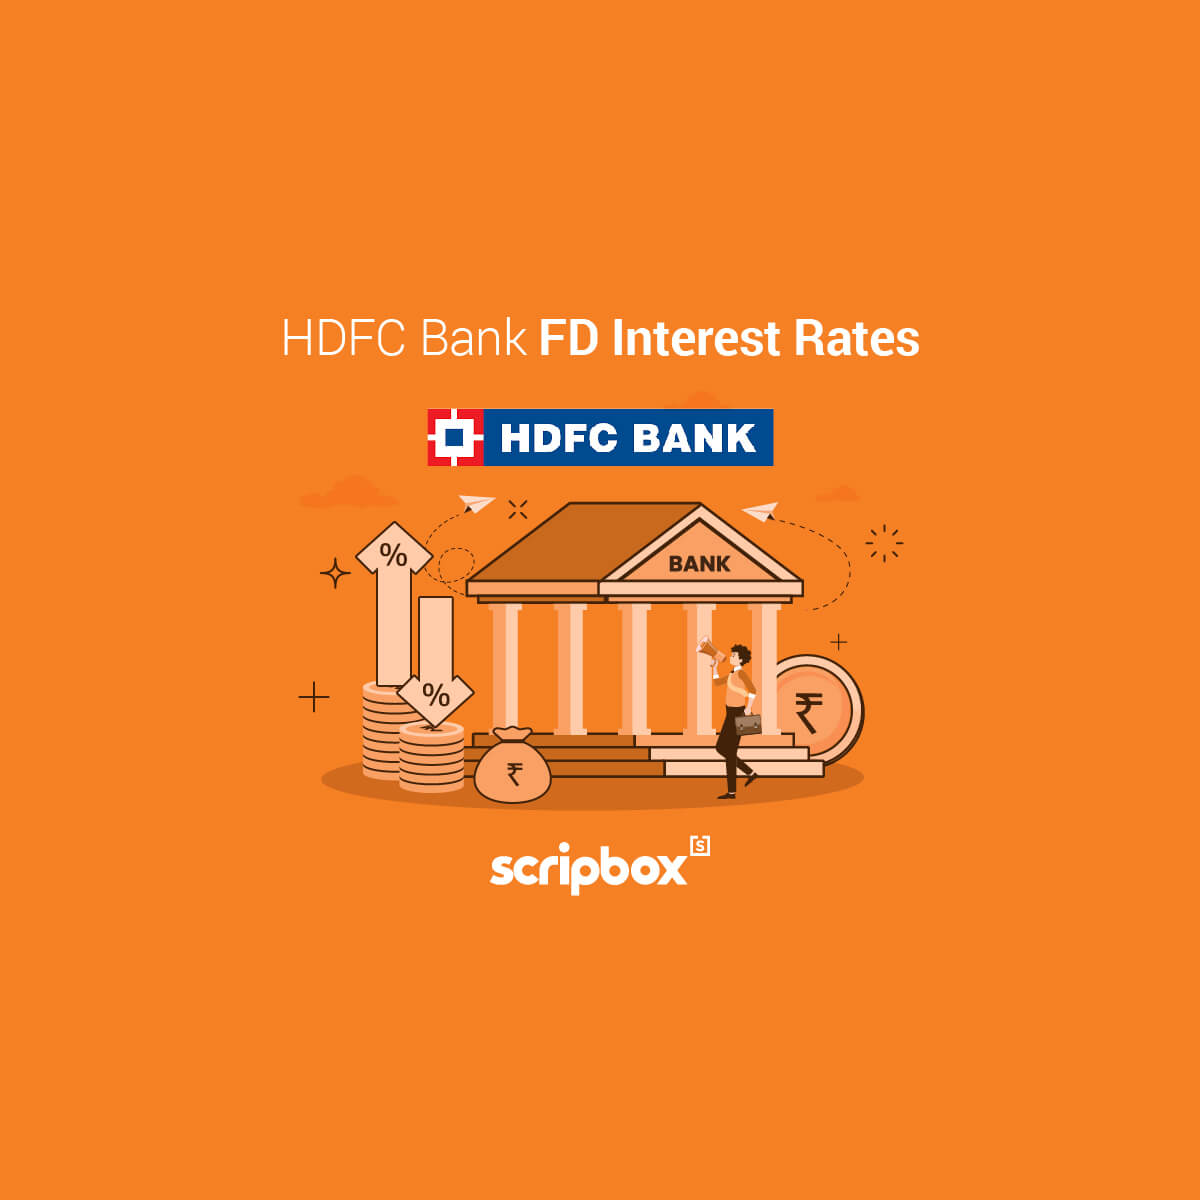 hdfc bank interest rates for fixed deposits